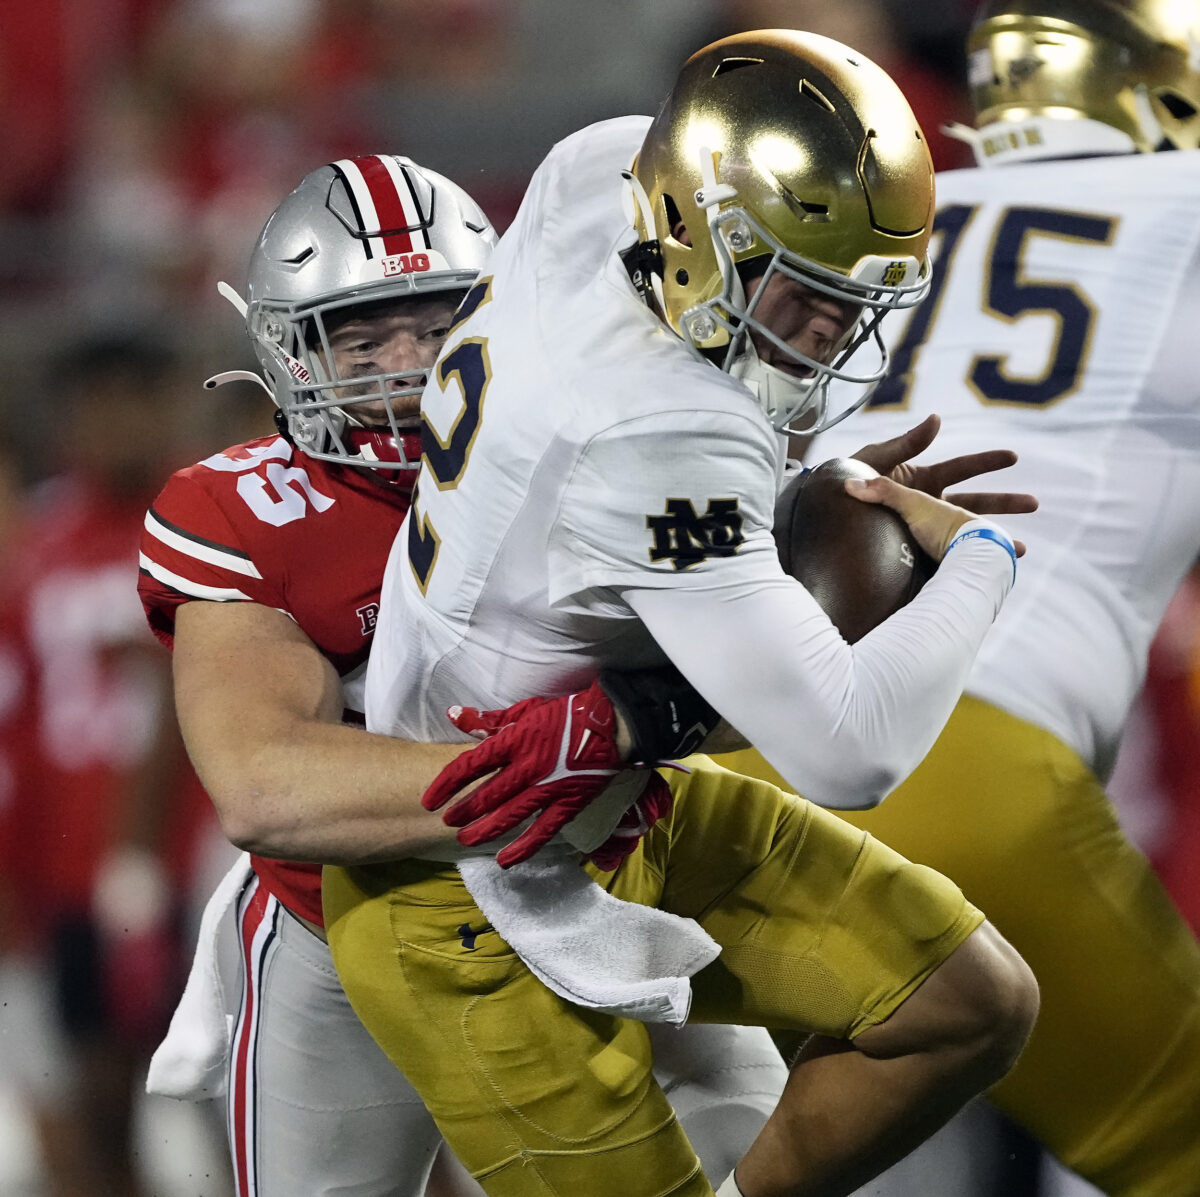 The five plays that loomed large in Notre Dame’s 21-10 loss to Ohio State